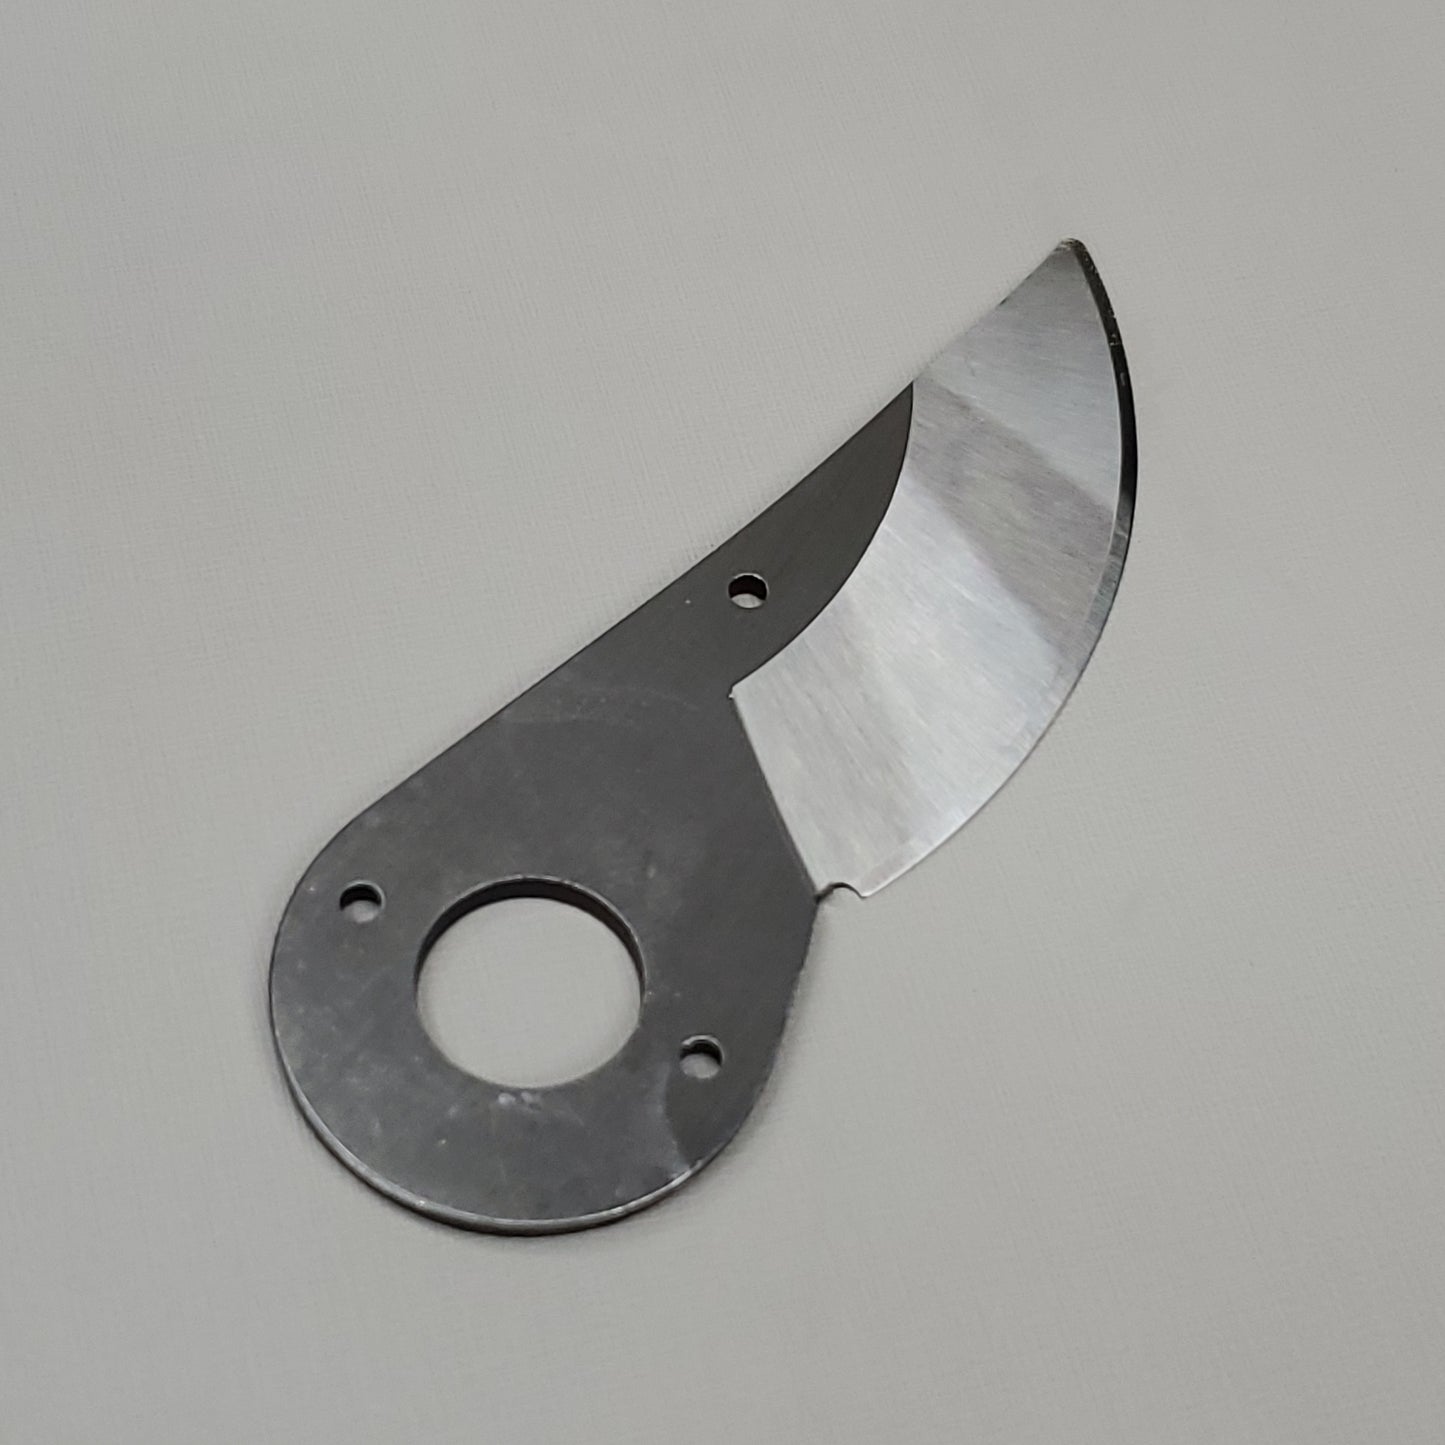 FELCO Swiss Made Pruner Replacement Cutting Blade 2/3 NB F2 F4 F11 F400 (New Other)